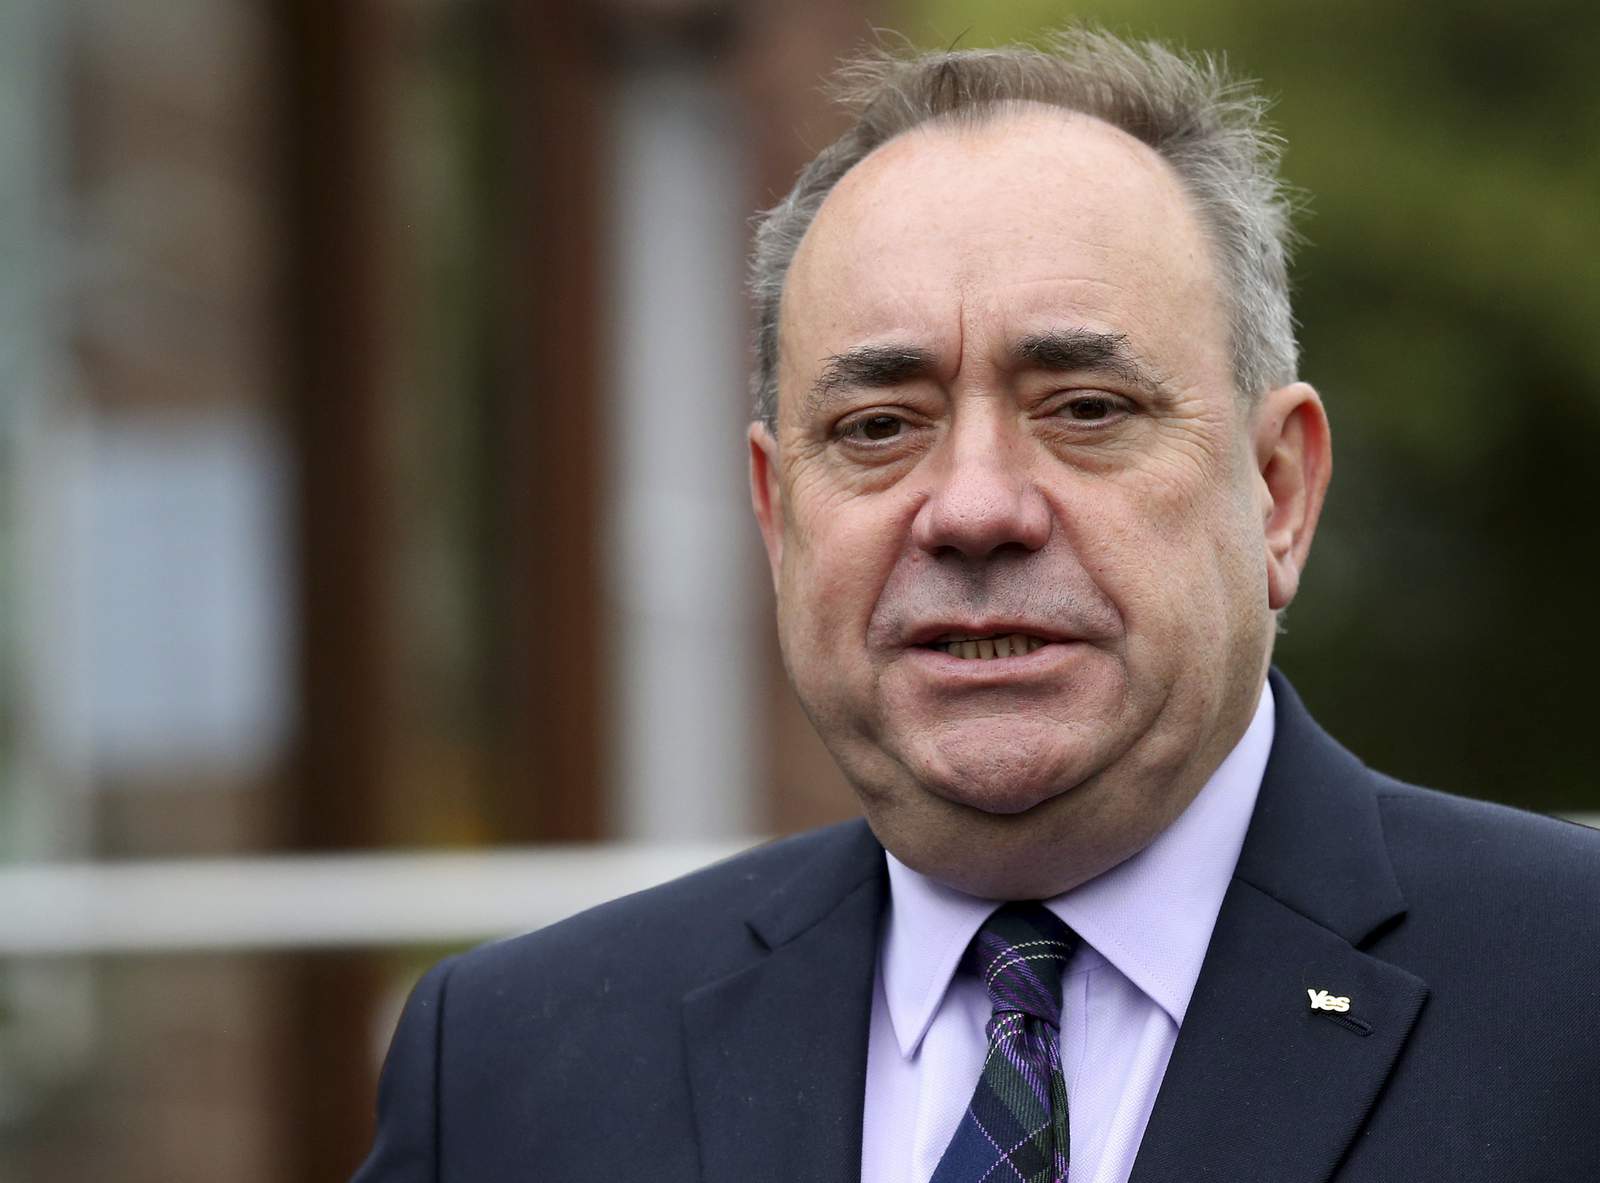 Former Scottish leader launches new pro-independence party